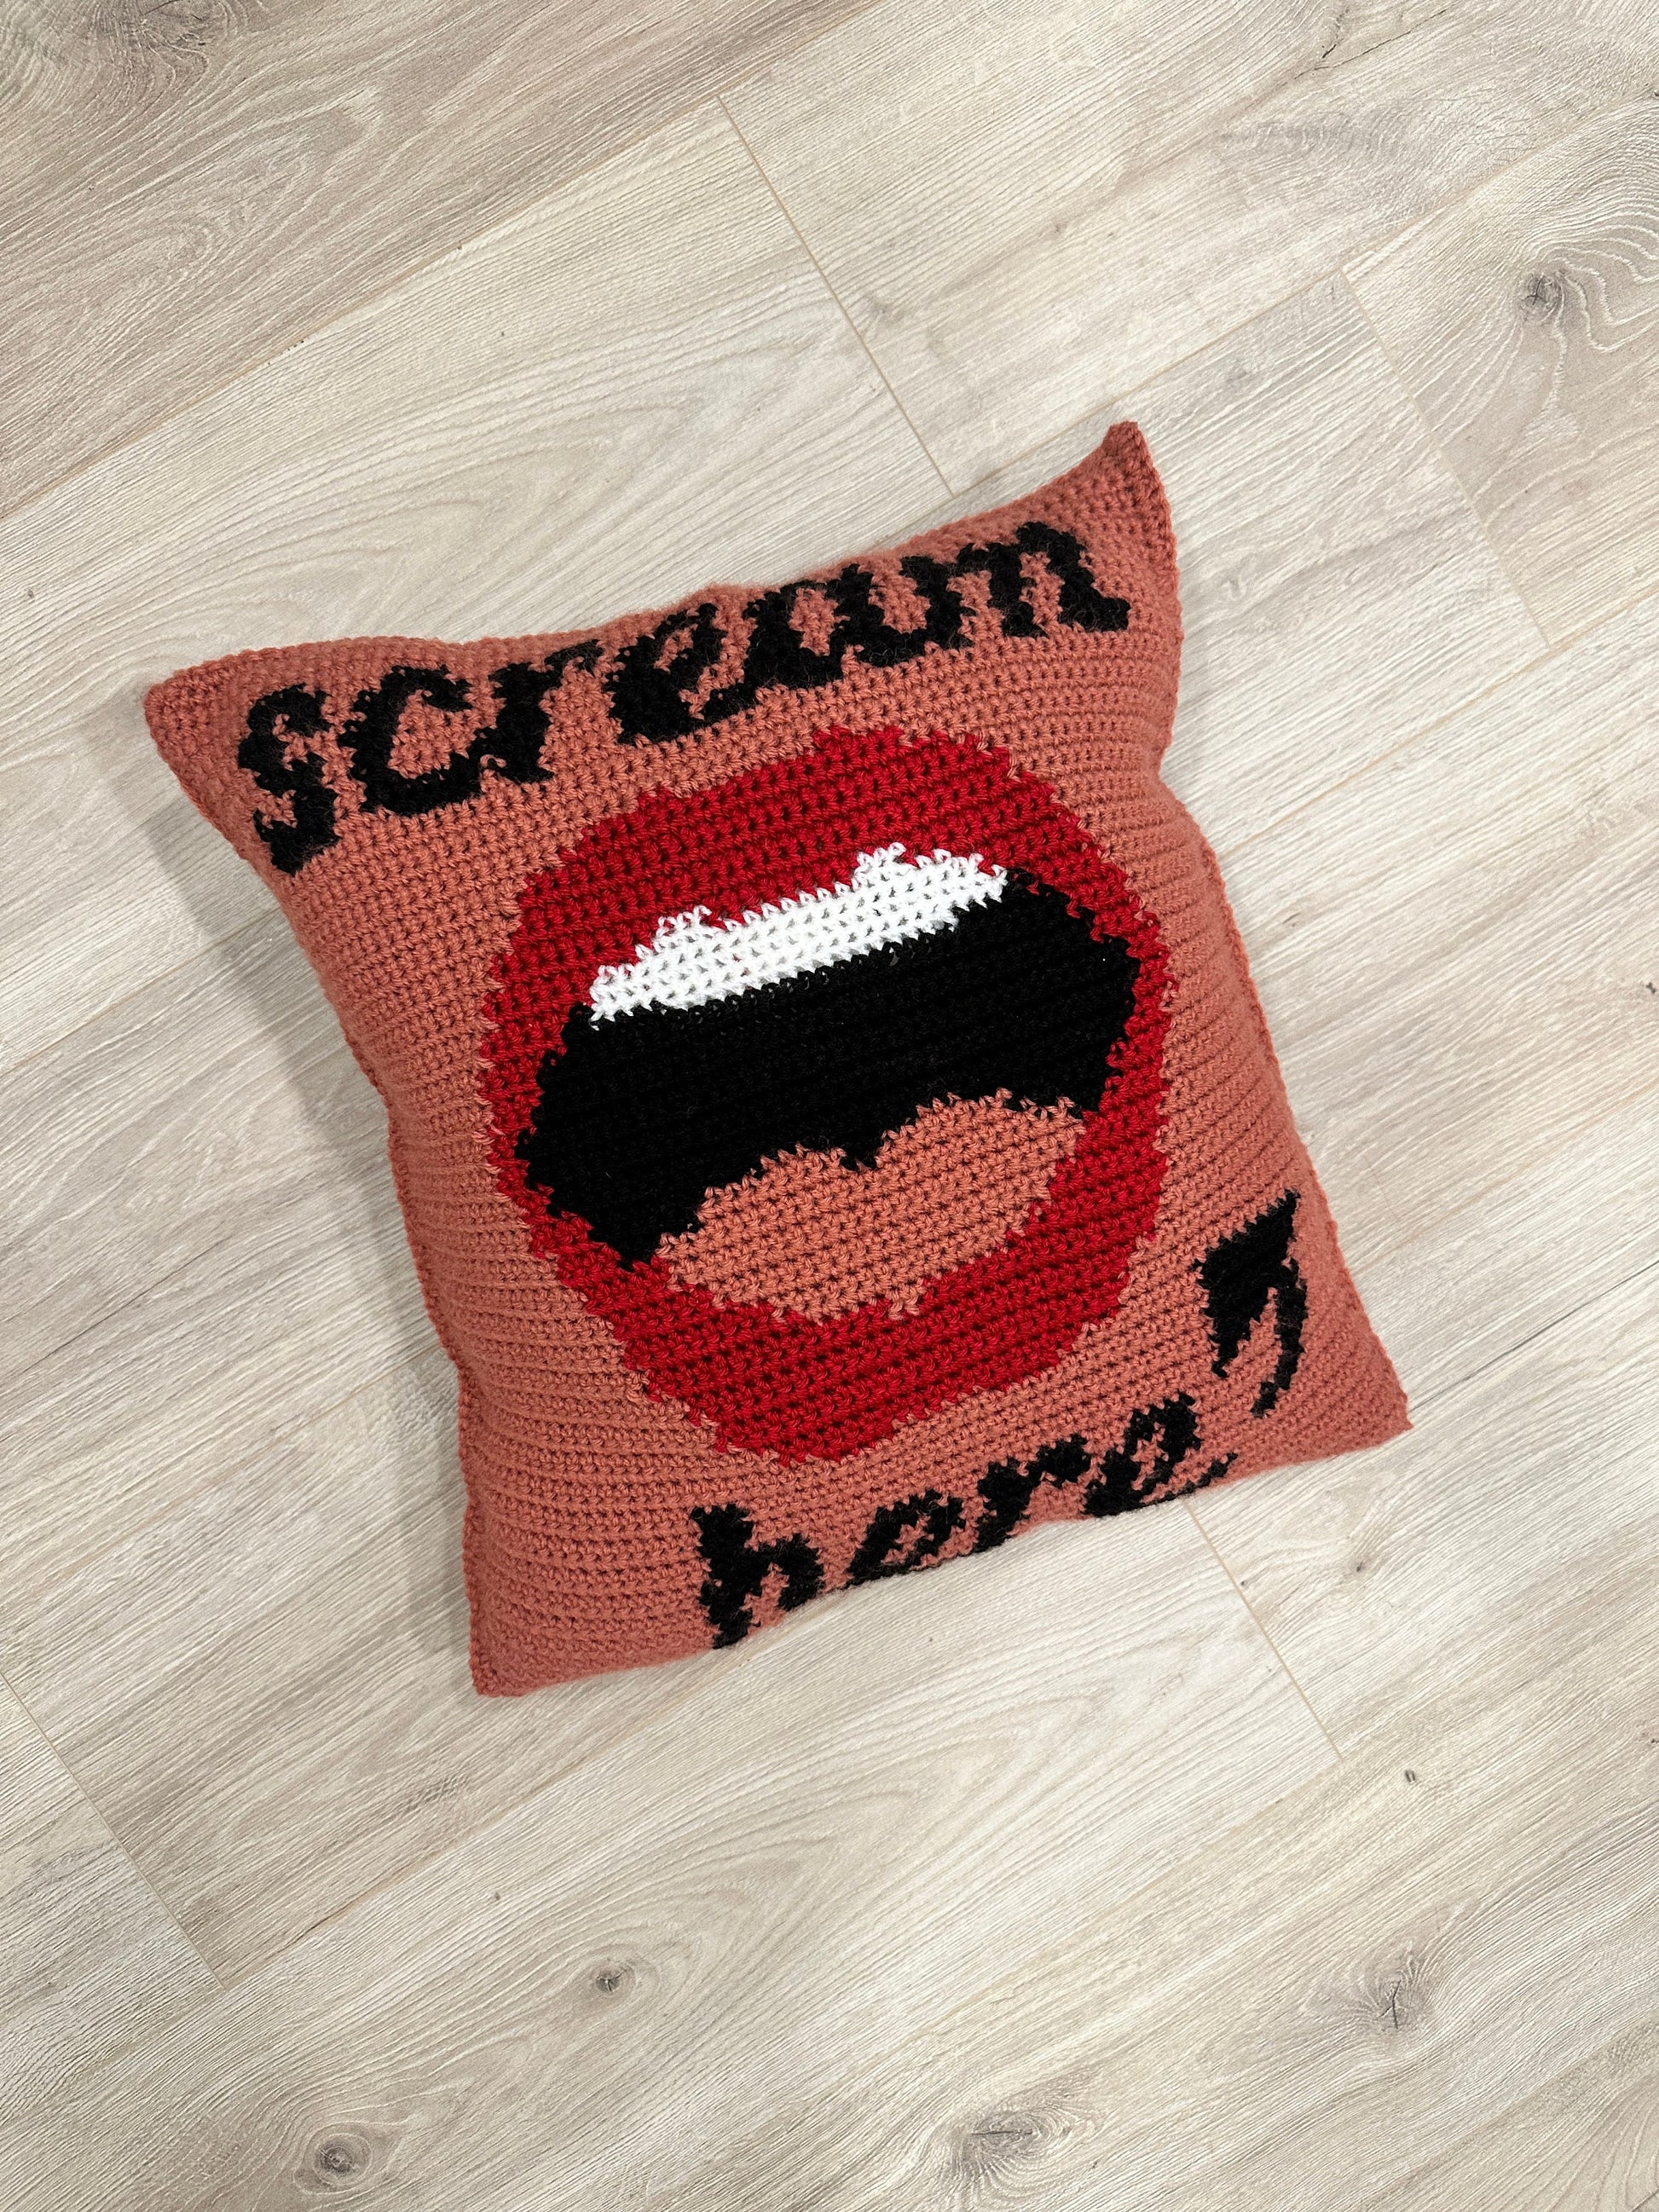 FINISHED CROCHET PILLOW (ready to ship)- Scream Here Crochet Pillow